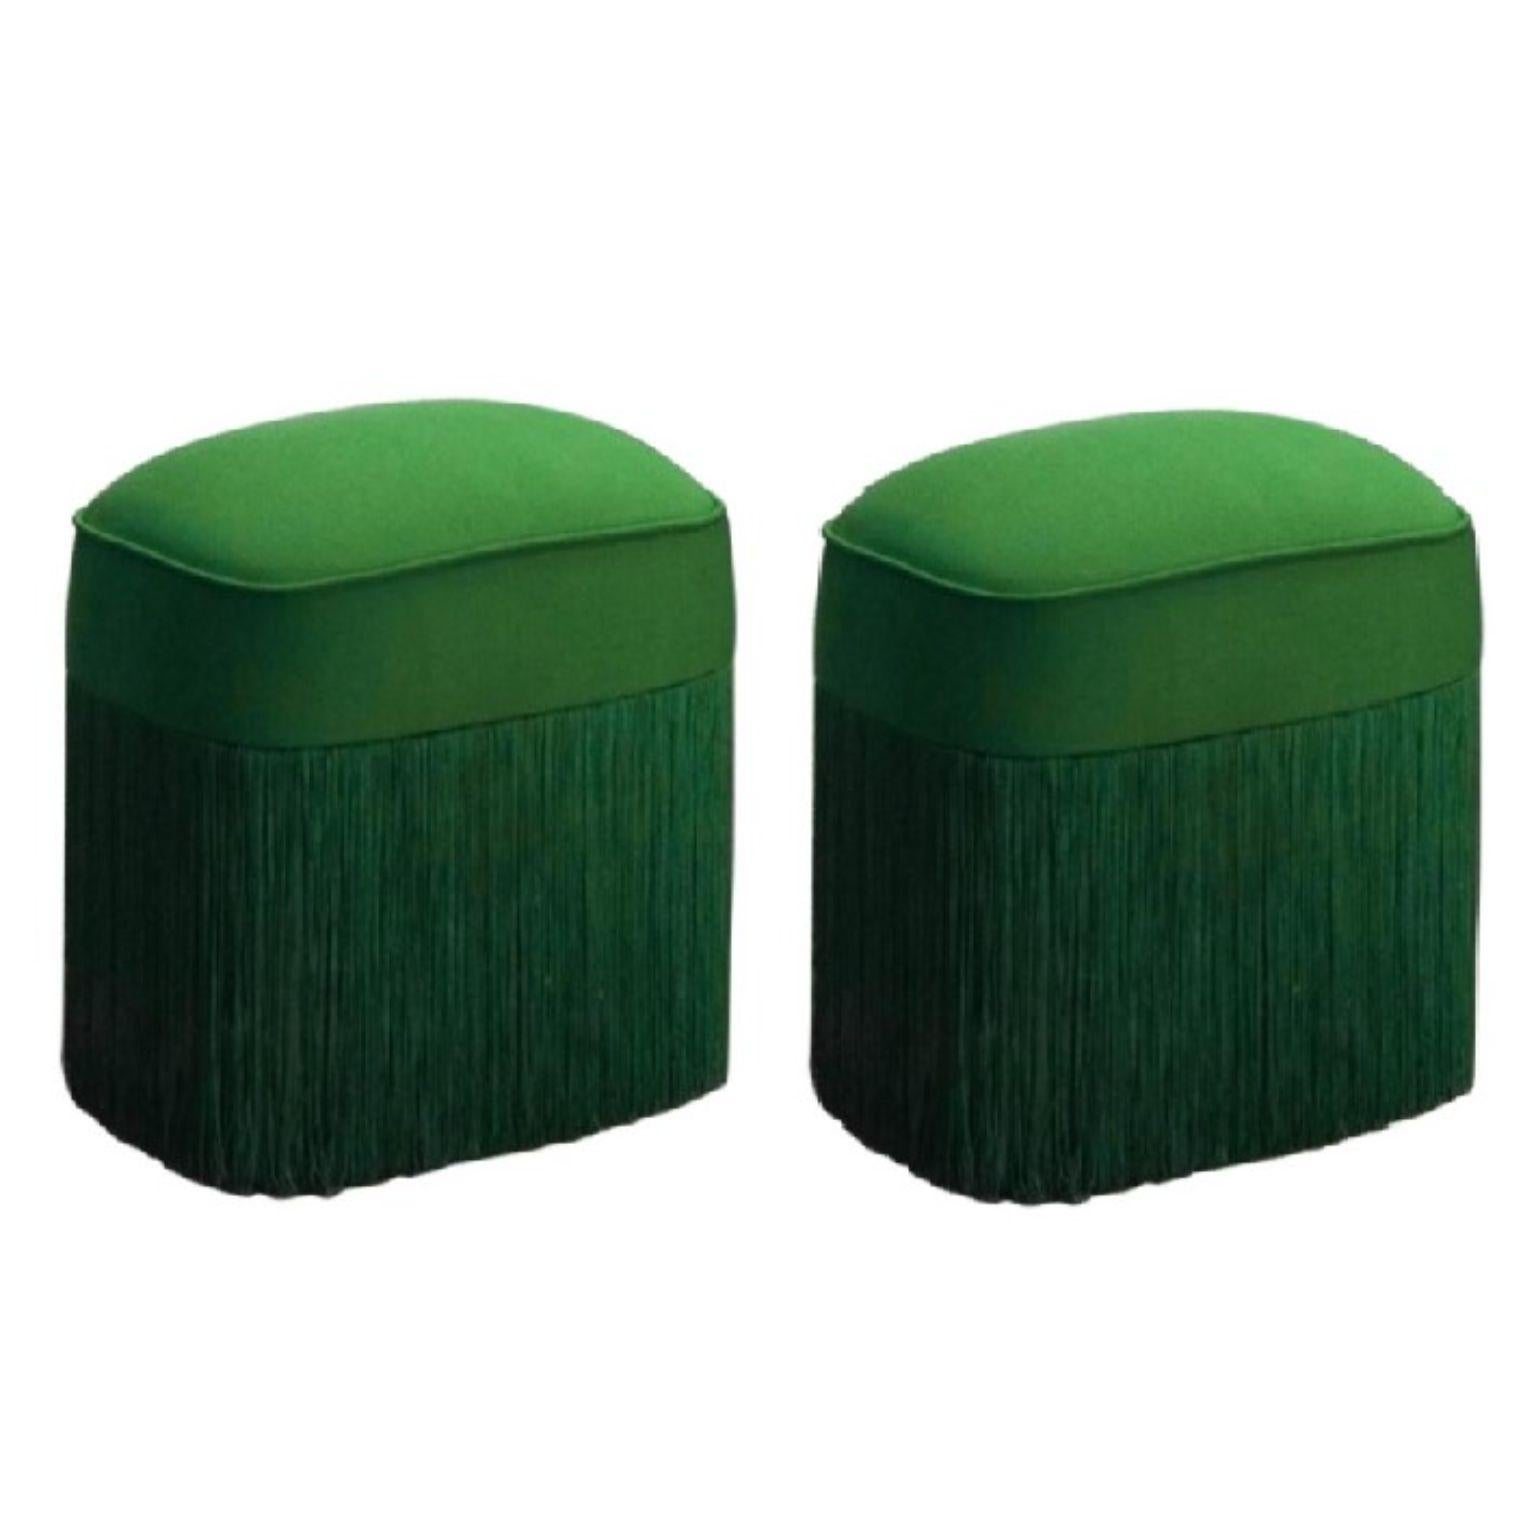 Set of 2 Green Galata Ottomans by Edvin Klasson
2017
Dimensions: H 45 x W 45 x D 30 cm
Materials: Upholstery, pine, polyester fringes

The ottoman was originally conceived in Turkey, and introduced to Europe in the
late 18th century. Galata is